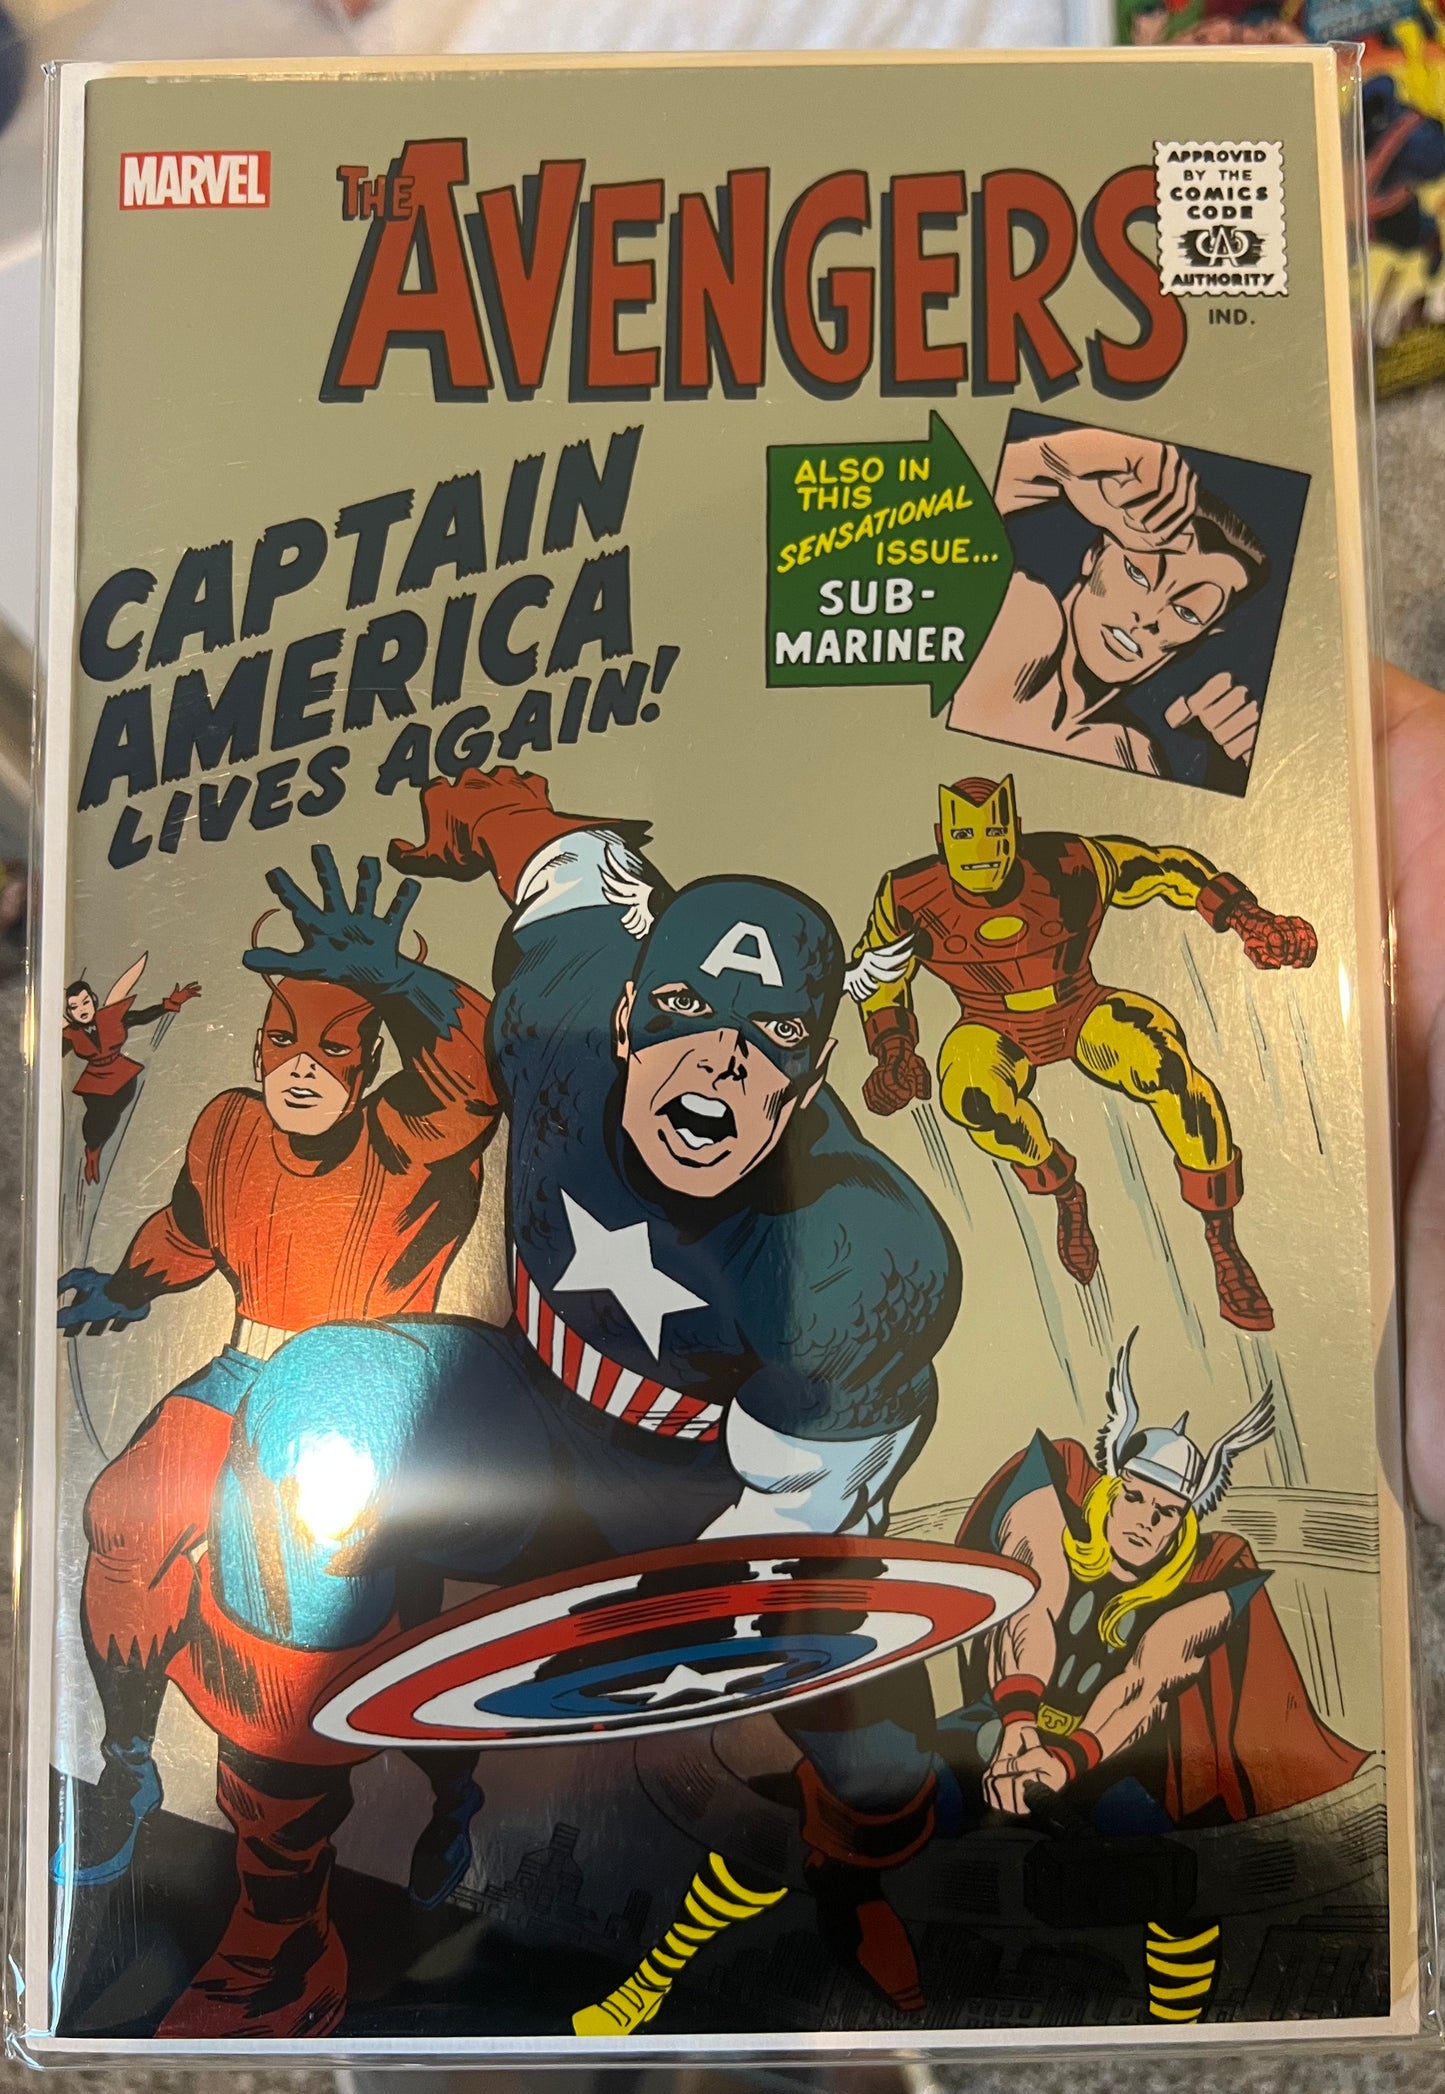 Avengers #4 (NYCC Mexican Foil Variant) Marvel Comics